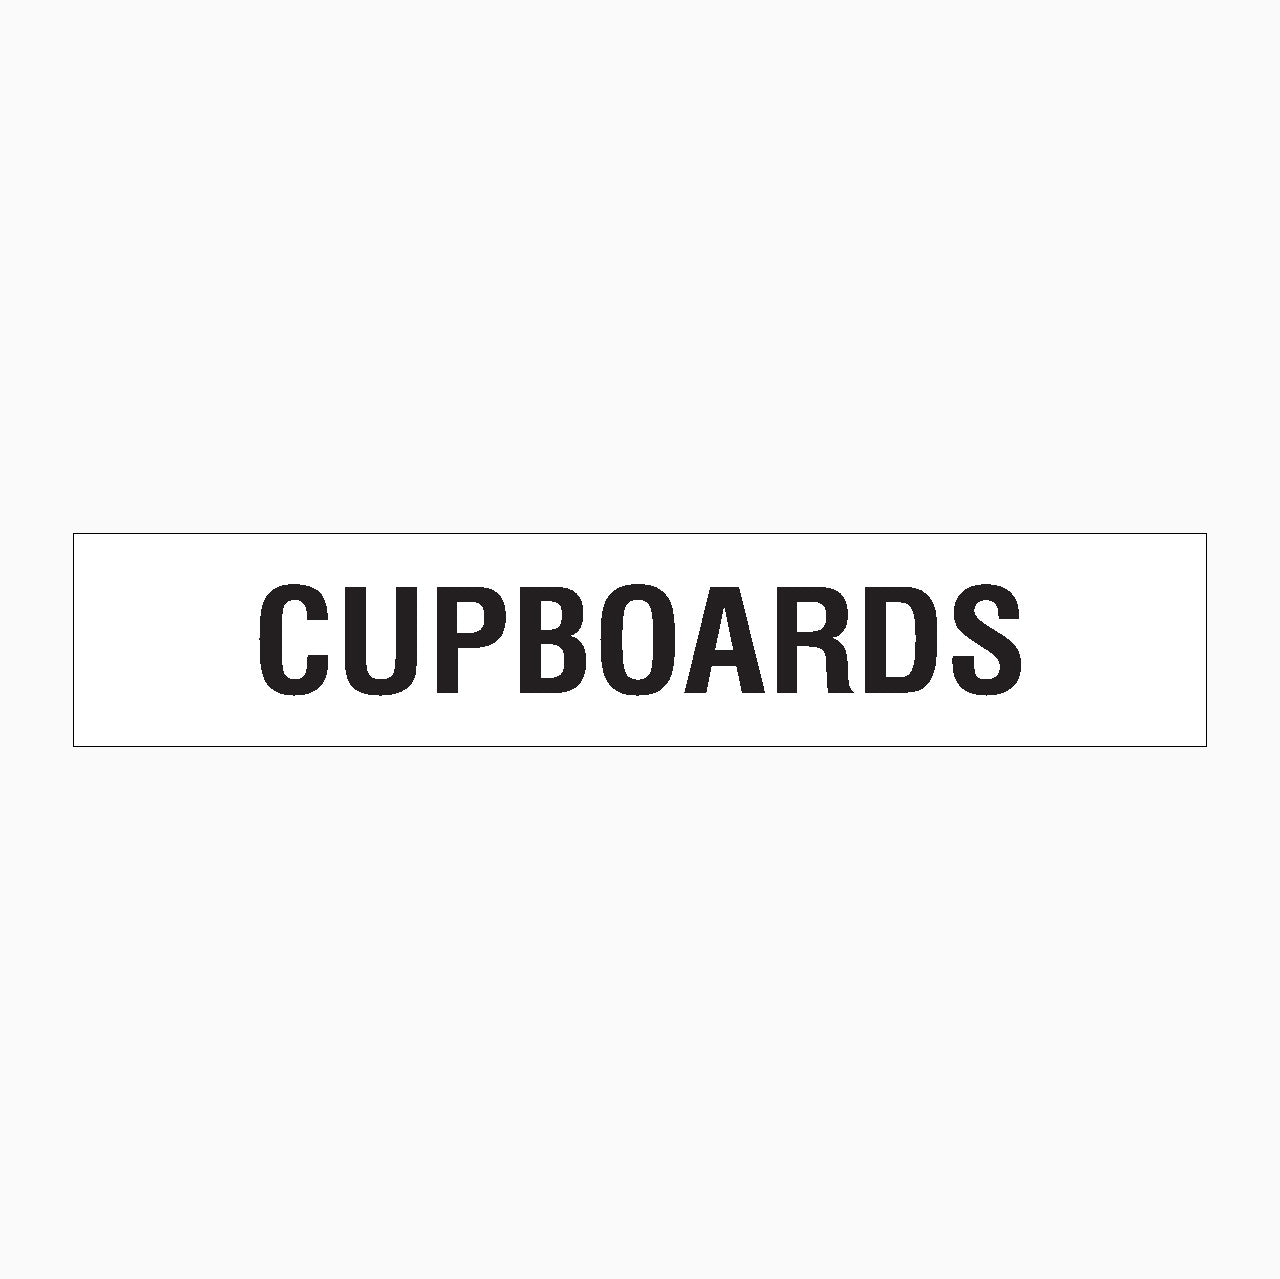 CUPBOARDS SIGN